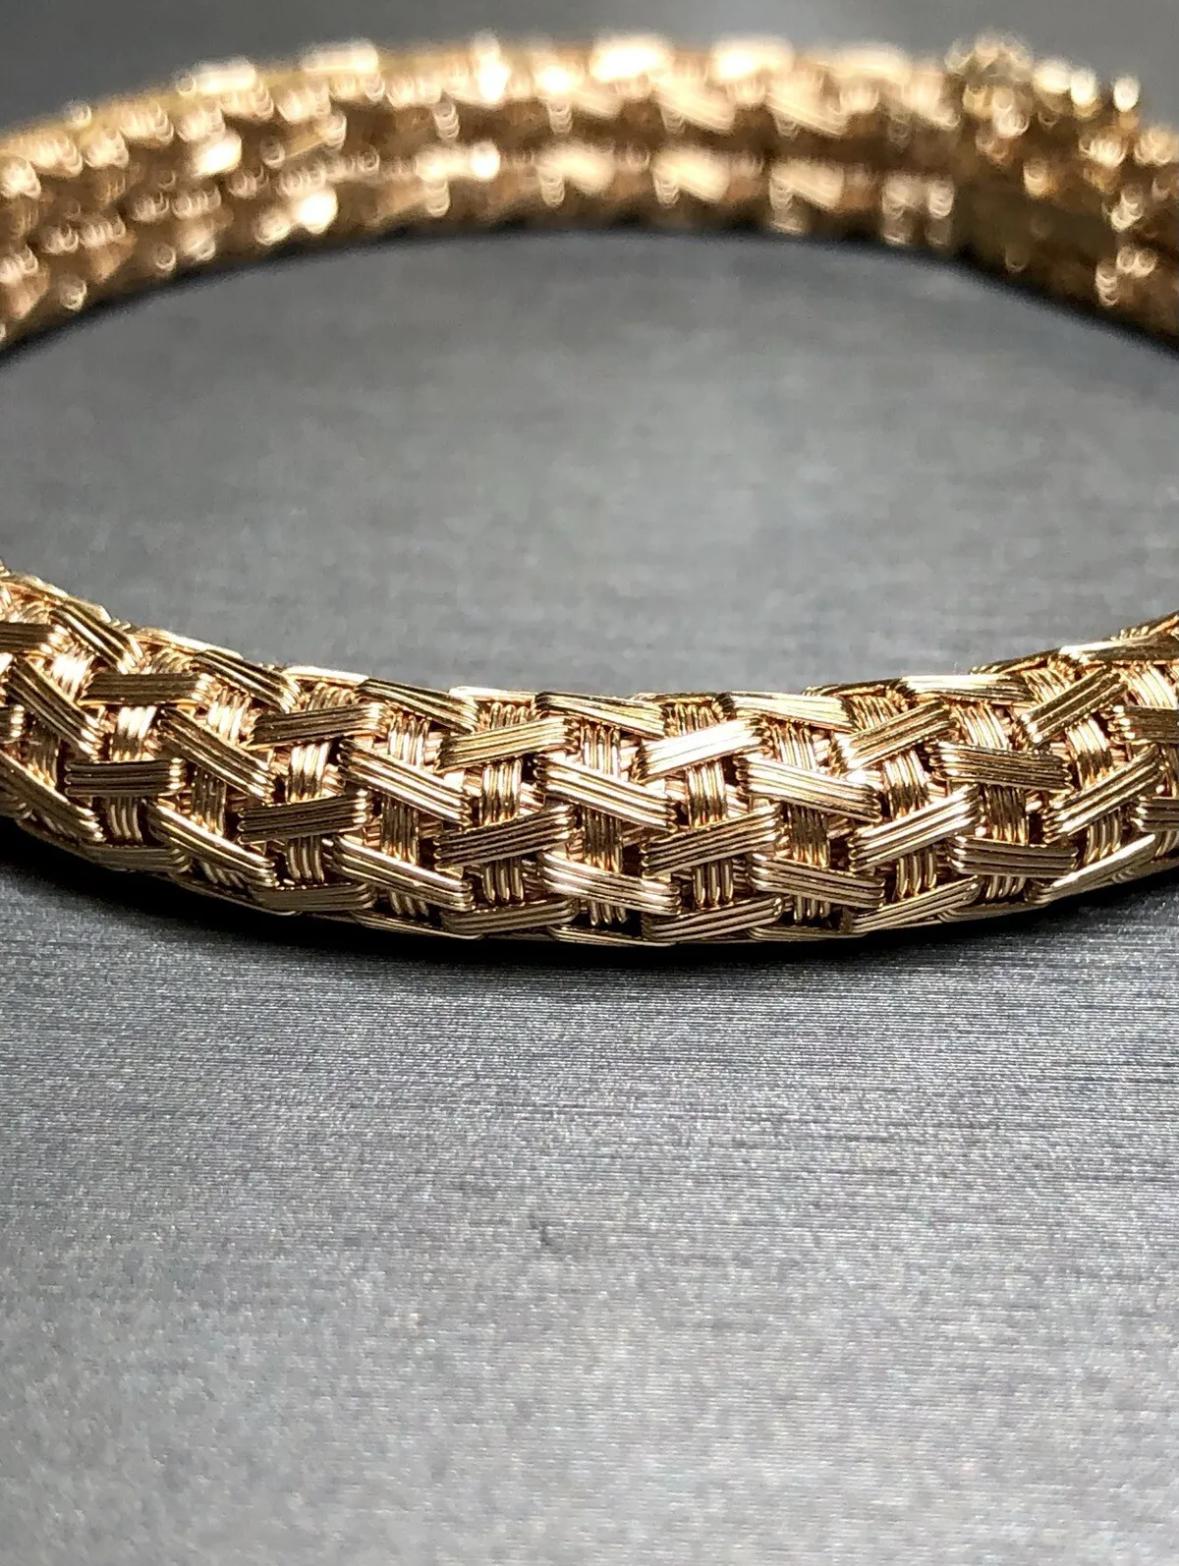 
A finely made bracelet crafted in heavy 18K rose gold in a gorgeous, detailed weave design. Complete with box clasp and safety.


Dimensions/Weight:

Bracelet measures 7” long and .43” wide and weighs 37.6g.


Condition:

Bracelet is free of any